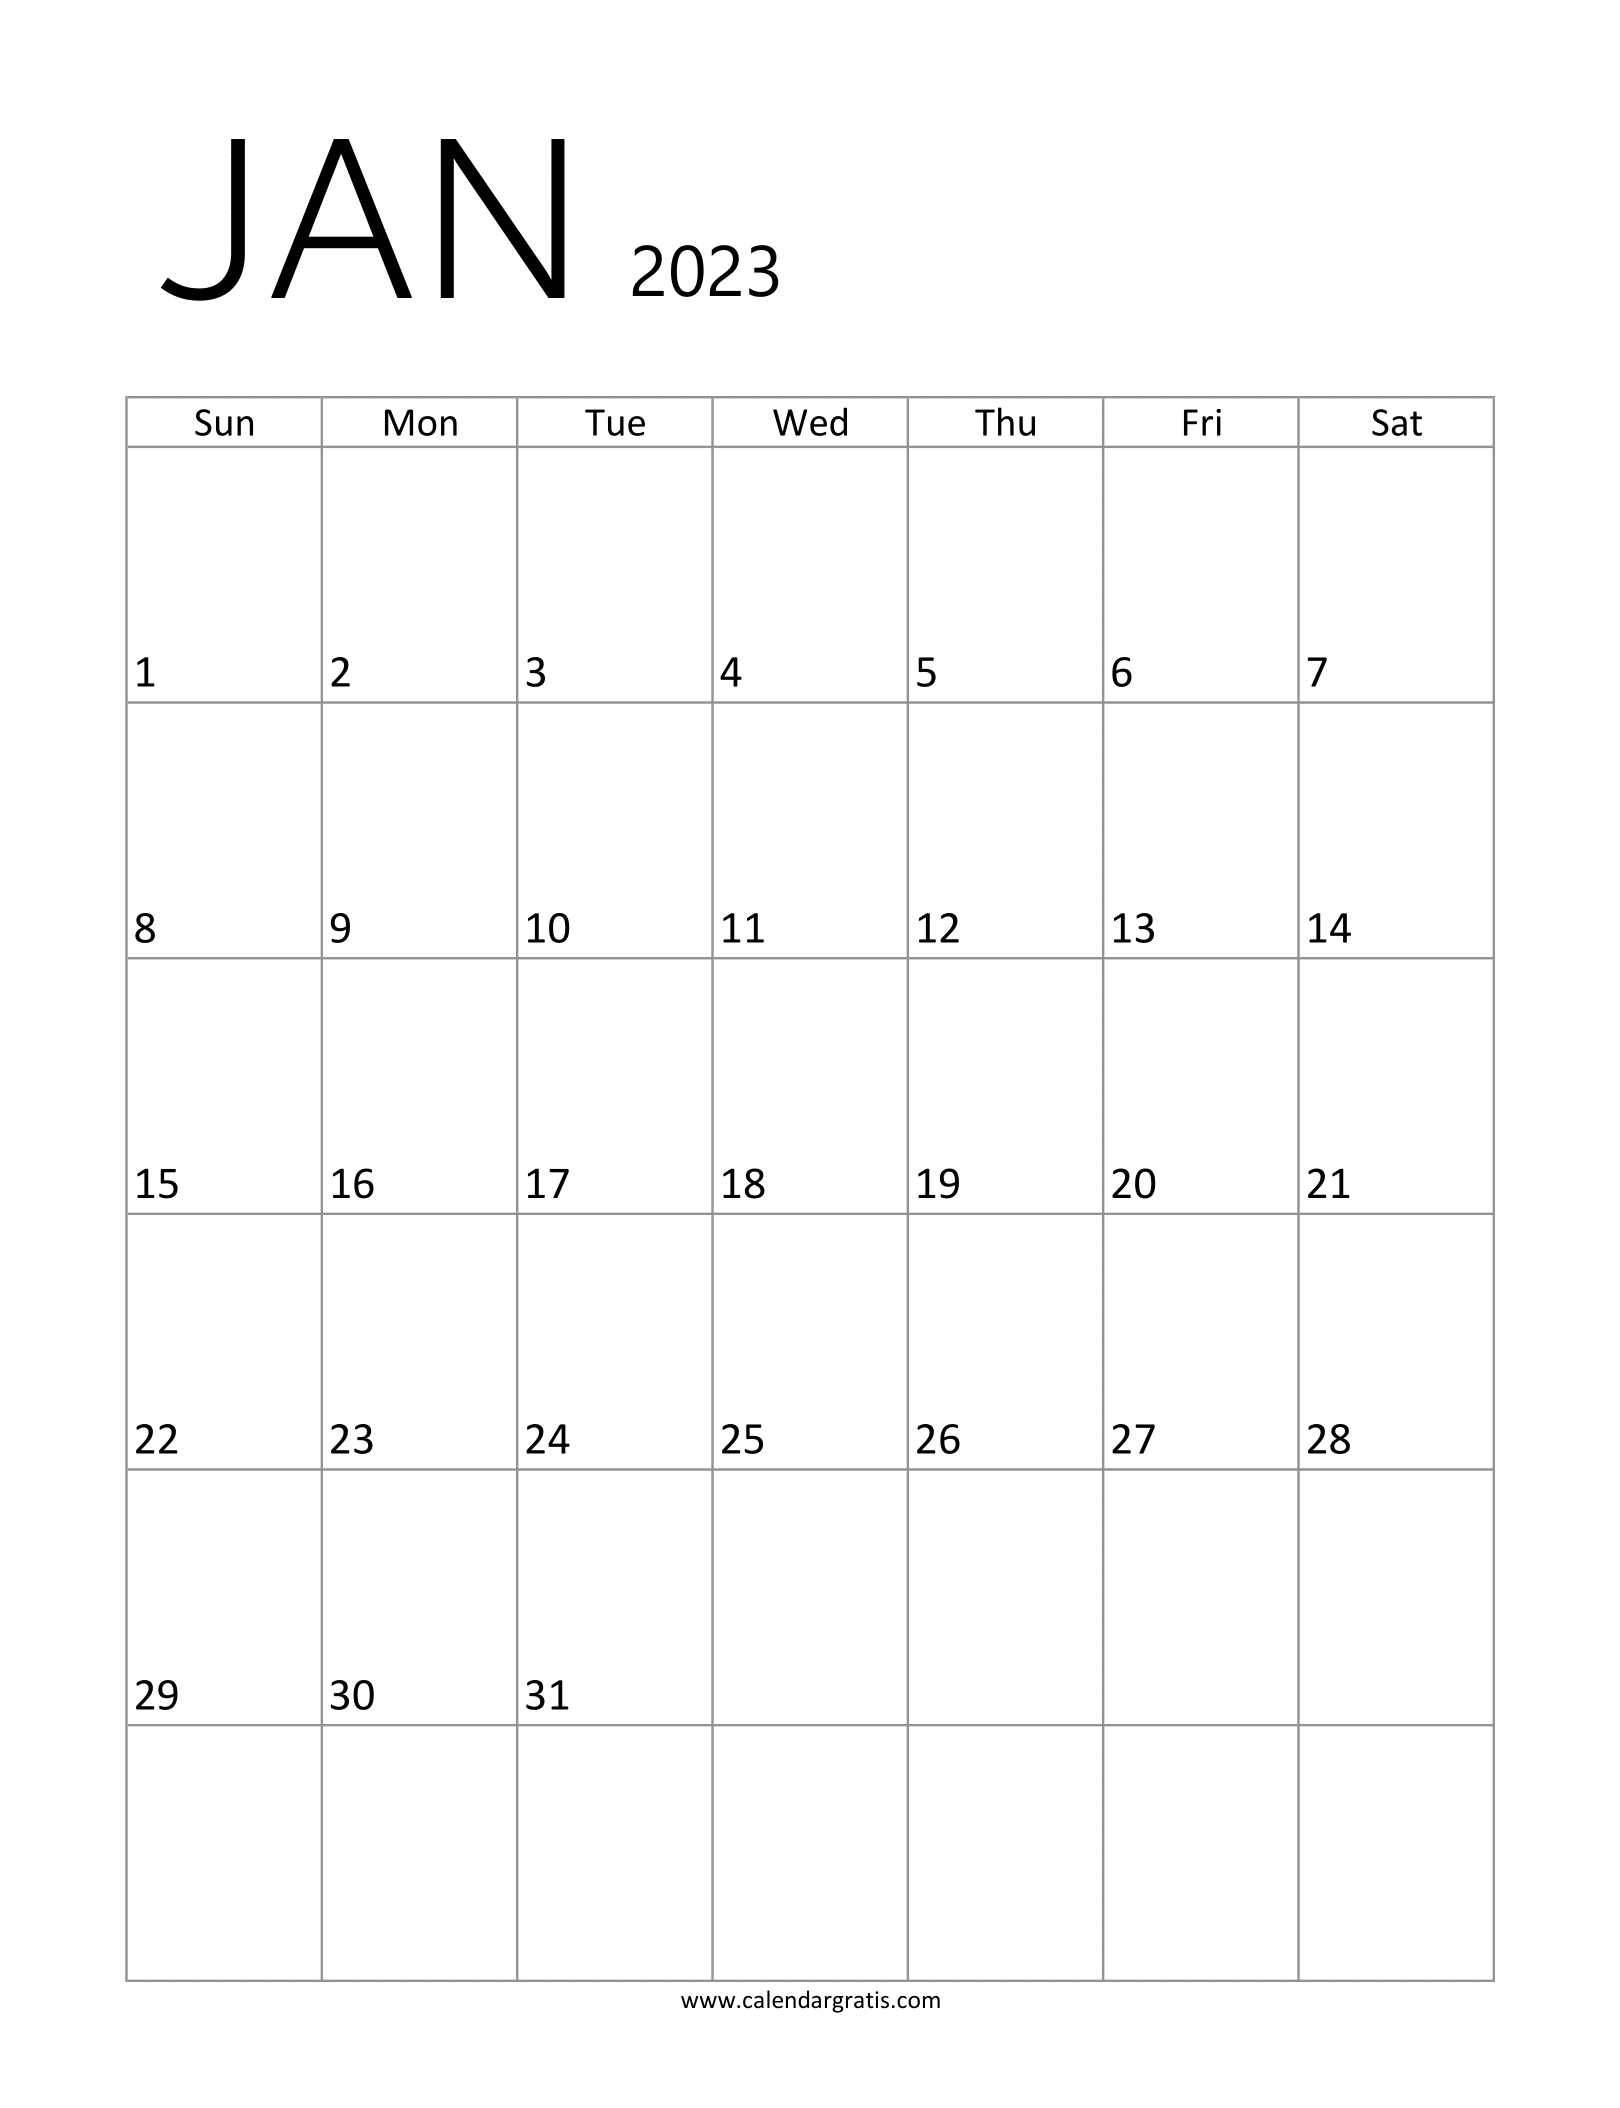 Printable Free January 2023 Calendar A4 Size Template. Downloadable January Month Calendar in Vertical Layout.